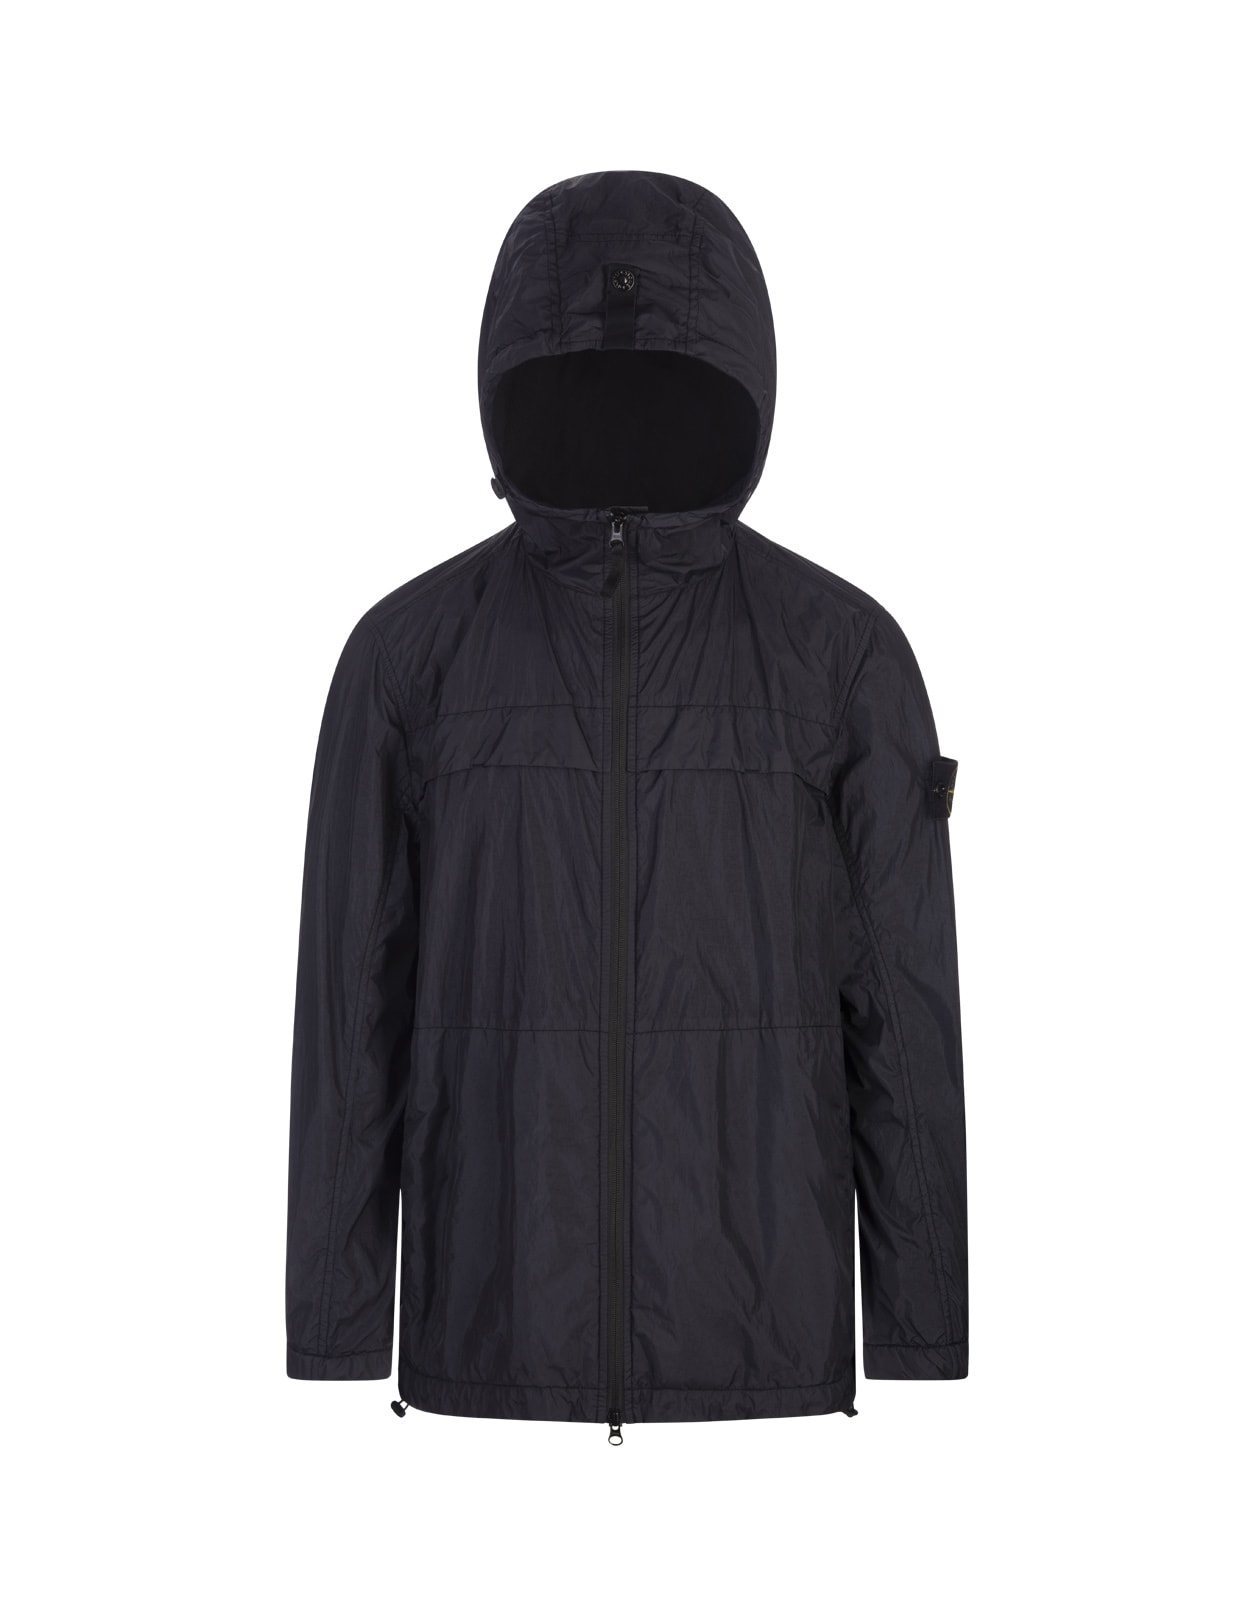 Stone Island Garment Dyed Crinkle Reps R-ny Lightweight Jacket In Navy Blue